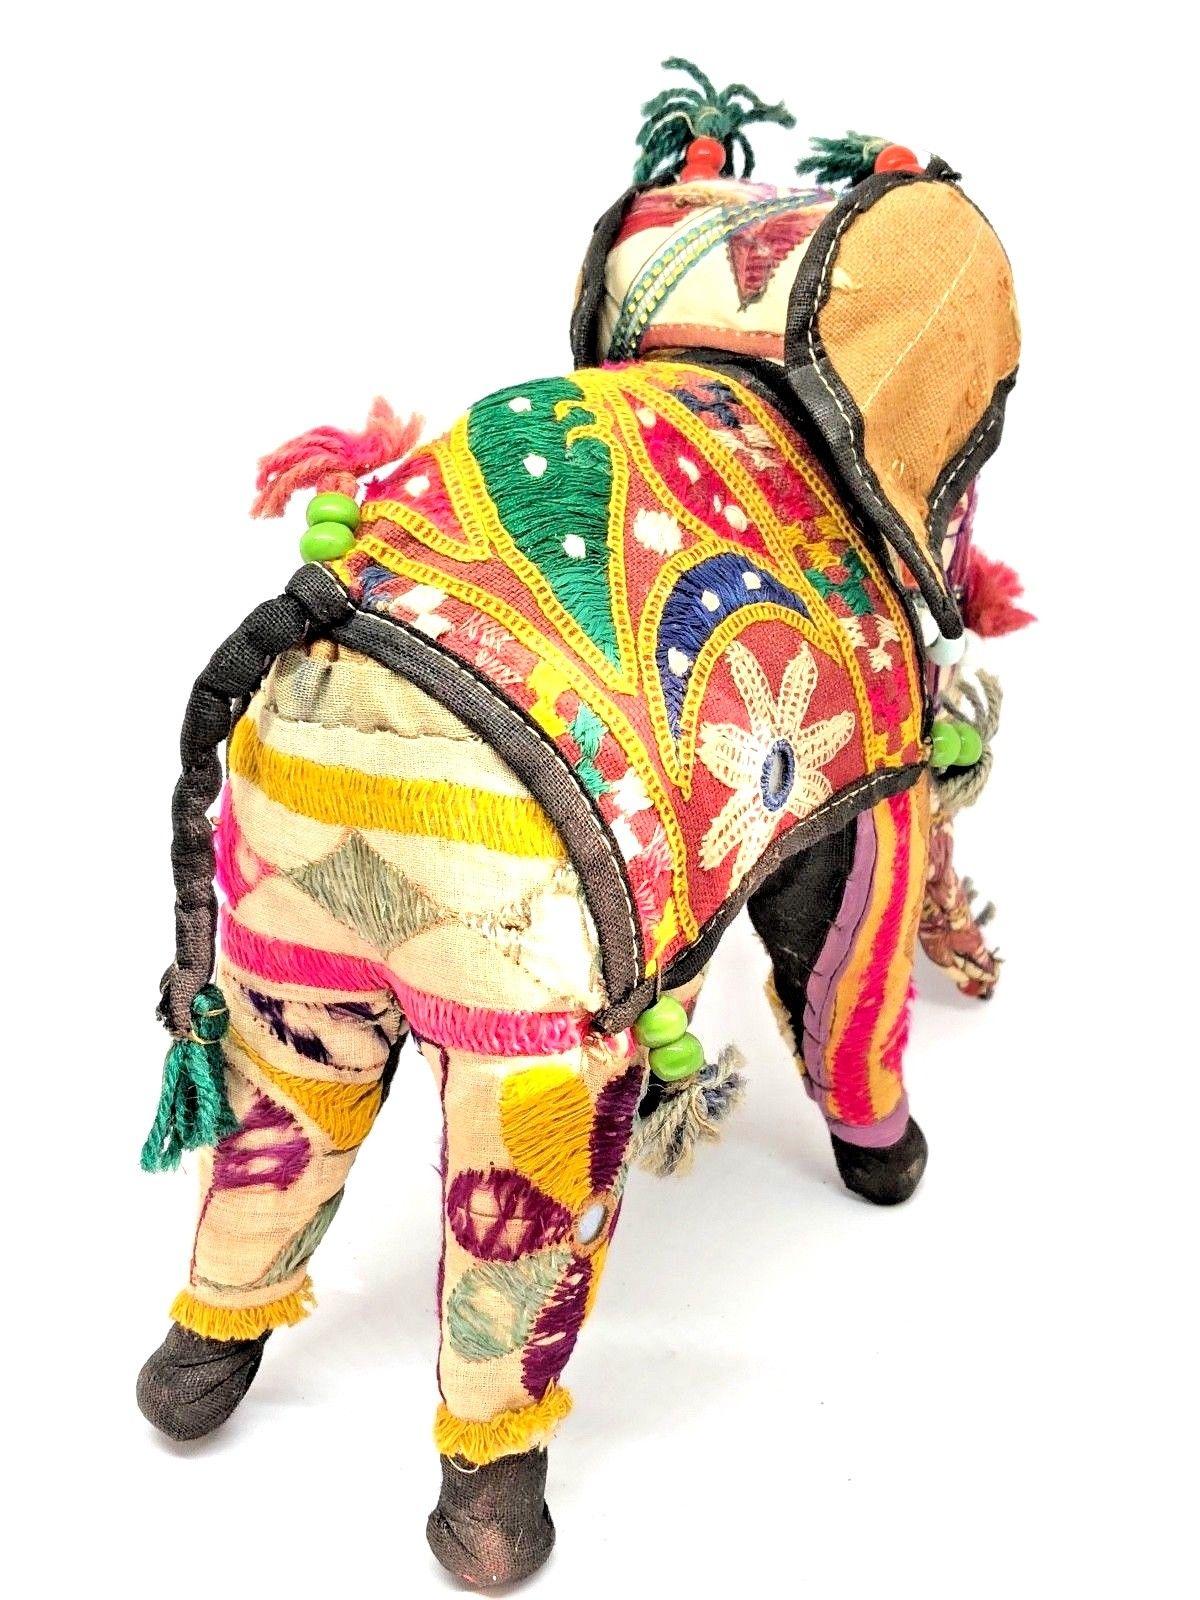 German Handcrafted Vintage Stuffed Fabric Embroidered Elephant, India